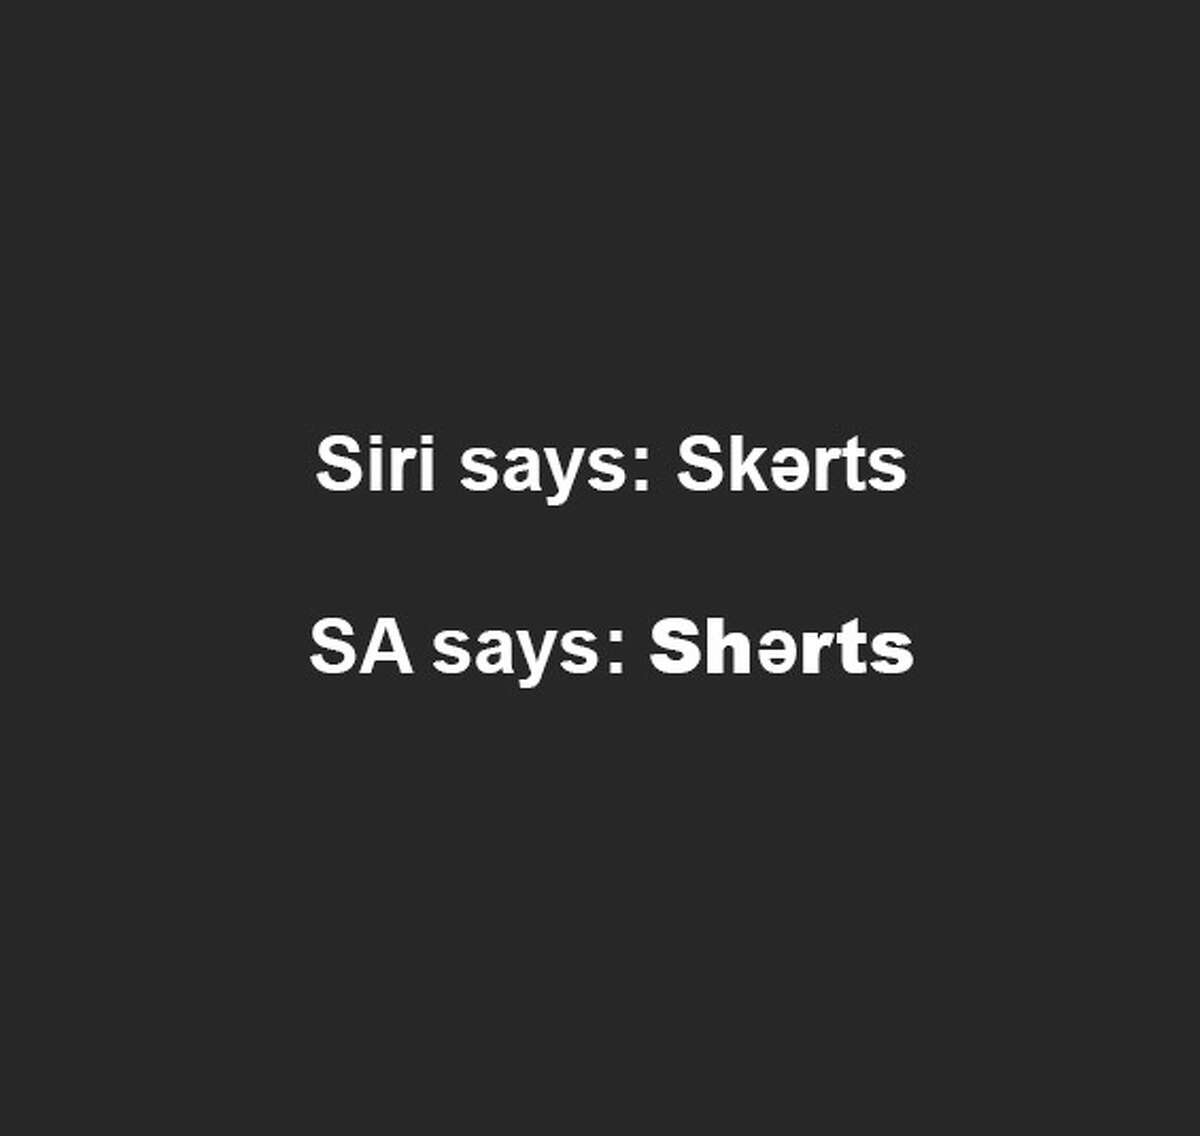 San Antonionians say “Shərts” like “Hold on to your shirts!” Siri says “Skərts” as in mini, pencil or pleated.